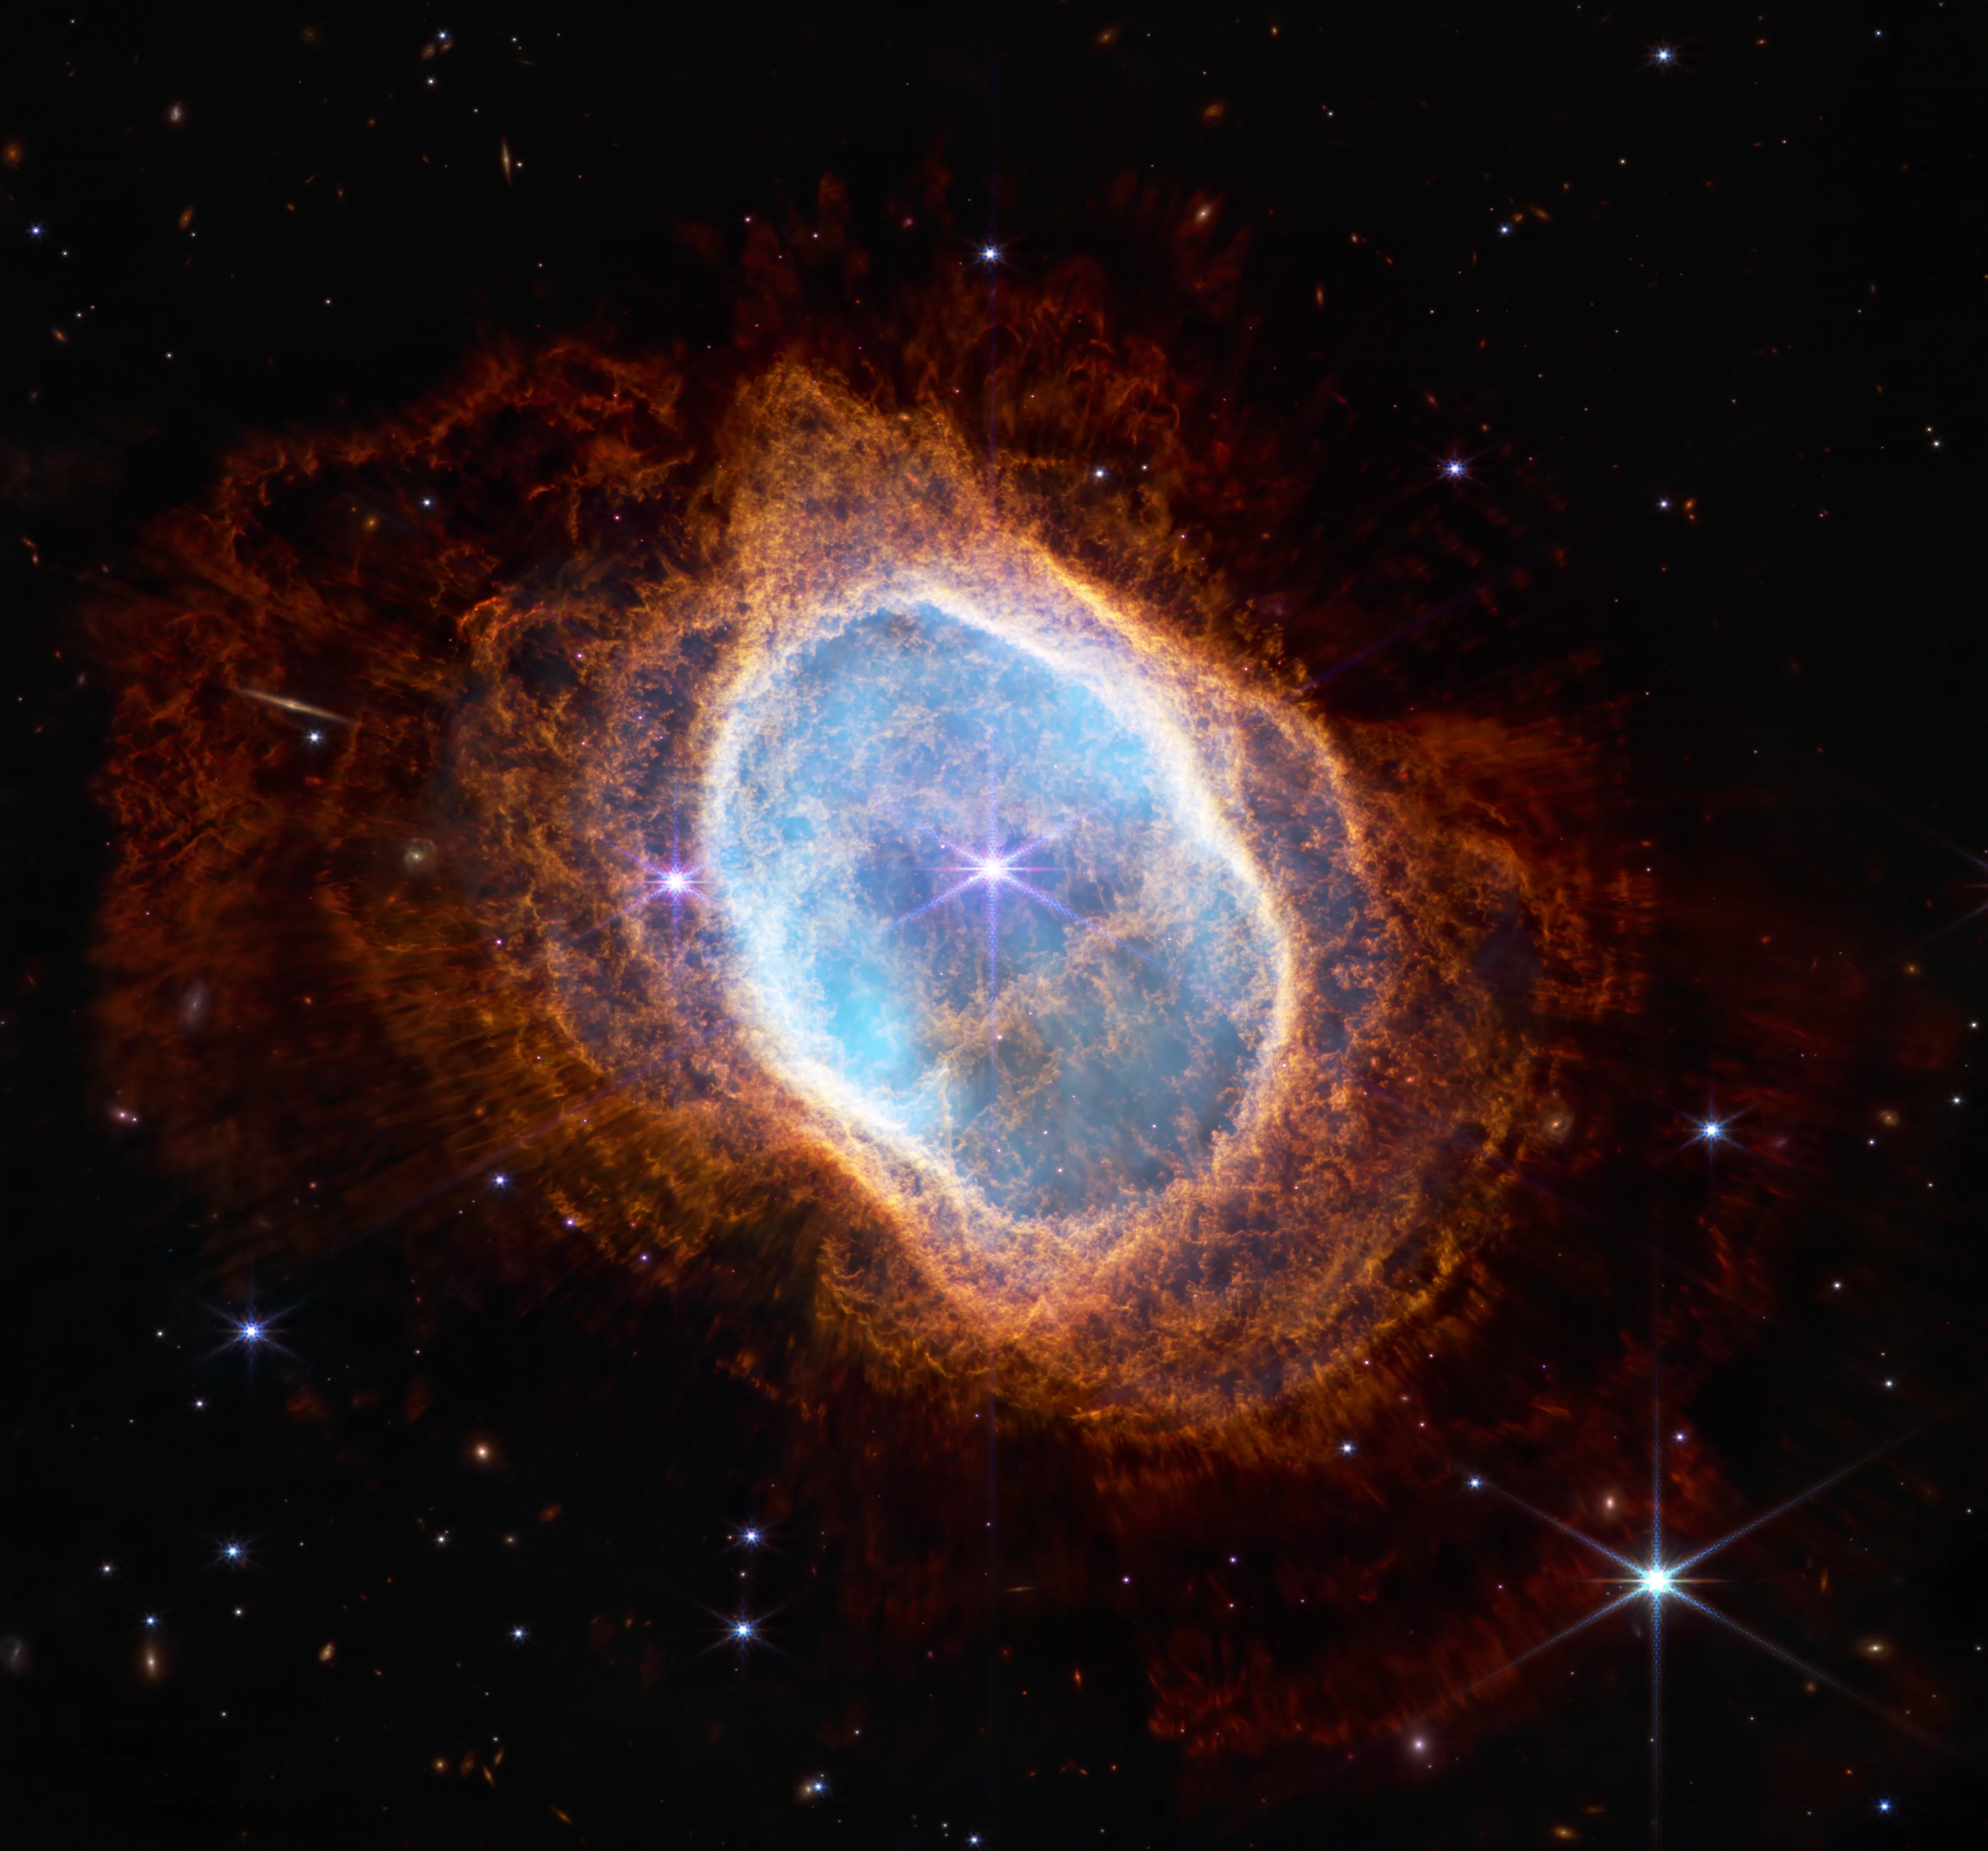 NASA’s Webb captures a dying star’s Final ‘Performance’ in fine detail: A planetary nebula, shaped like an irregular oval, with lacy, reddish orange plumes of gas and dust.?w=200&h=150